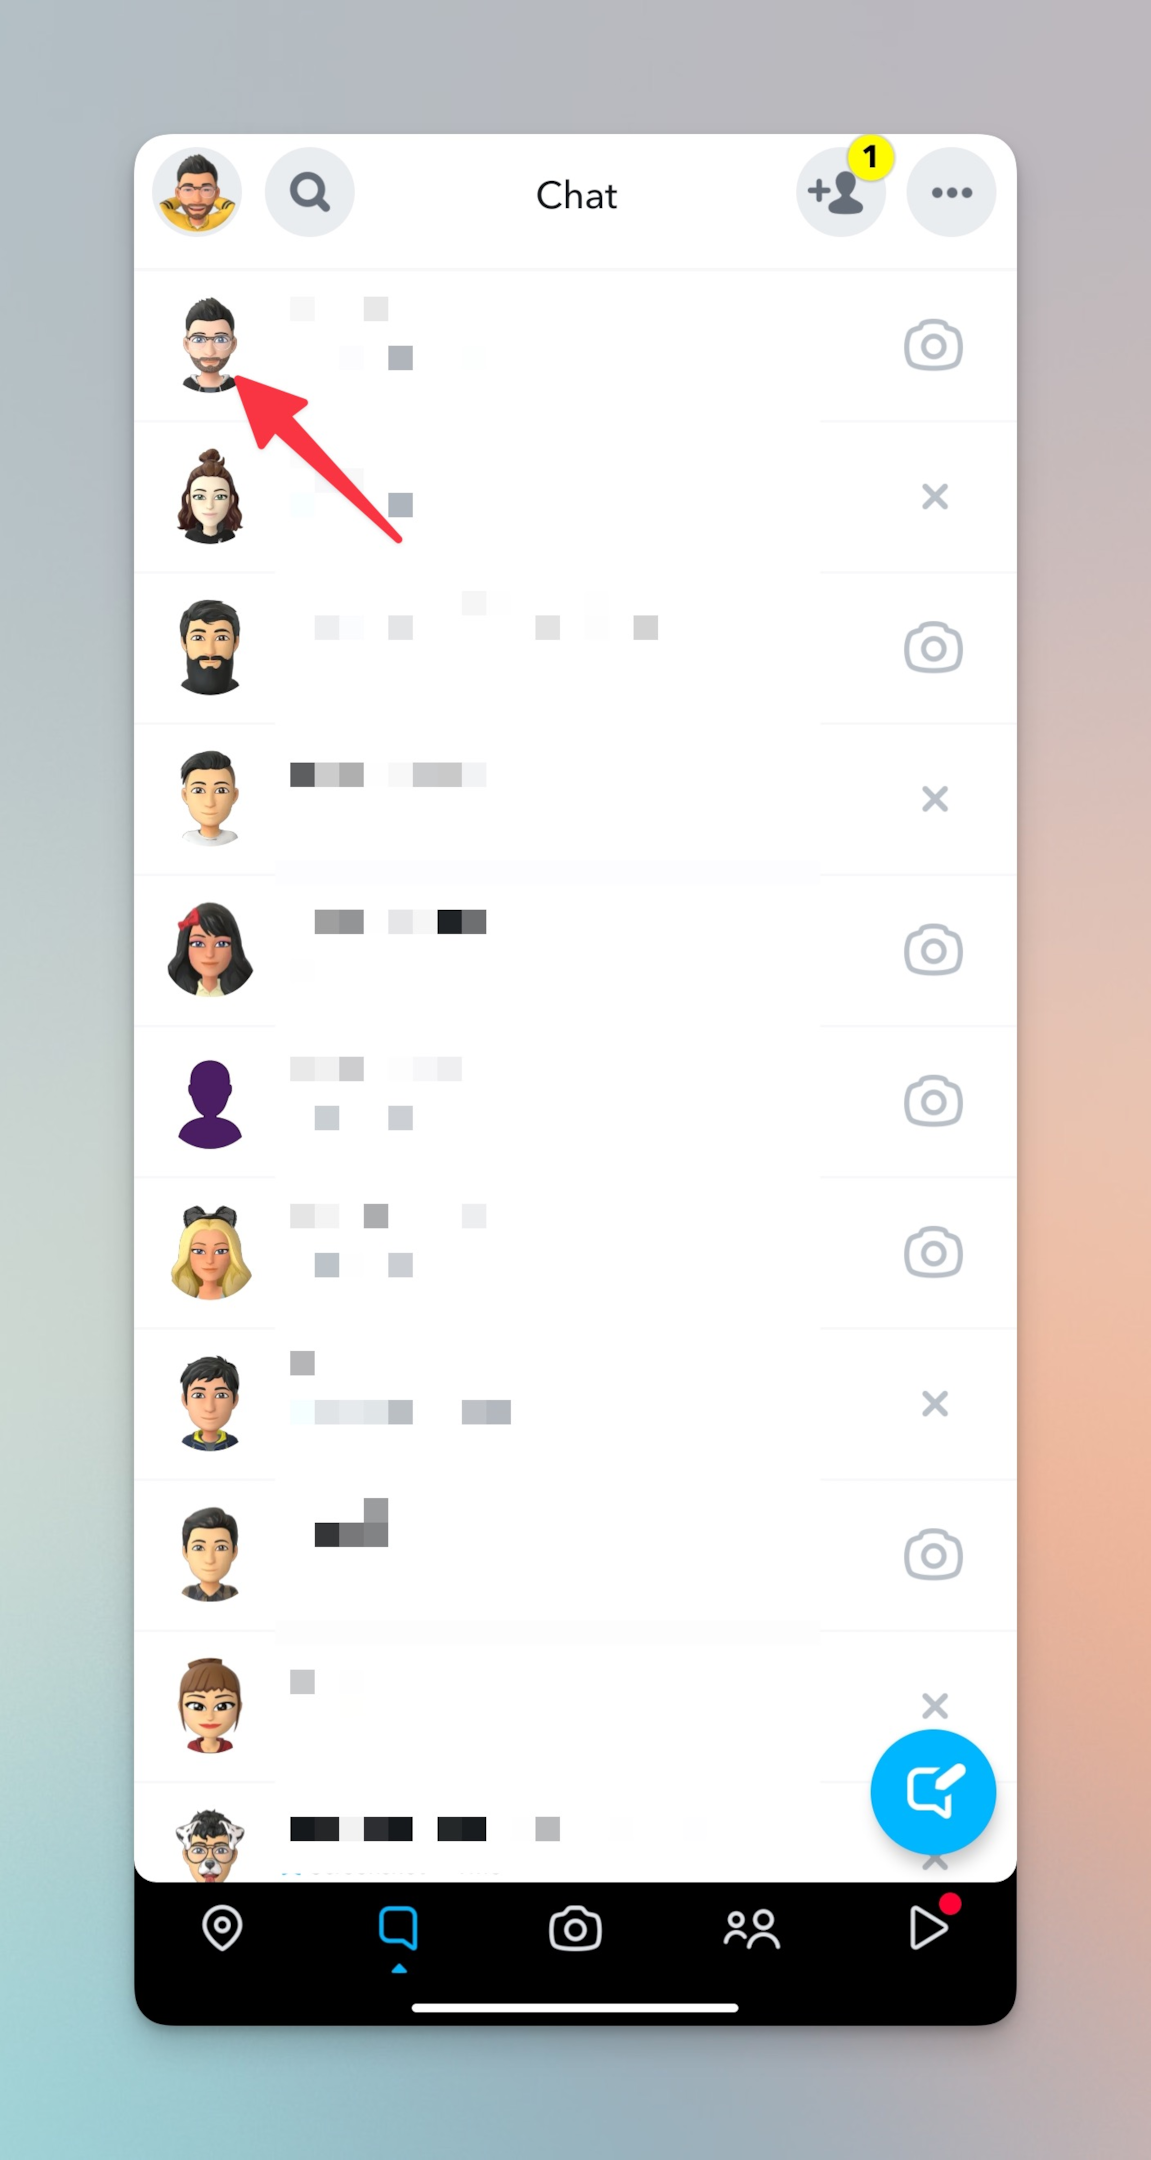 Remote.tools pointing to bitmoji icon to open a chat window of that profile